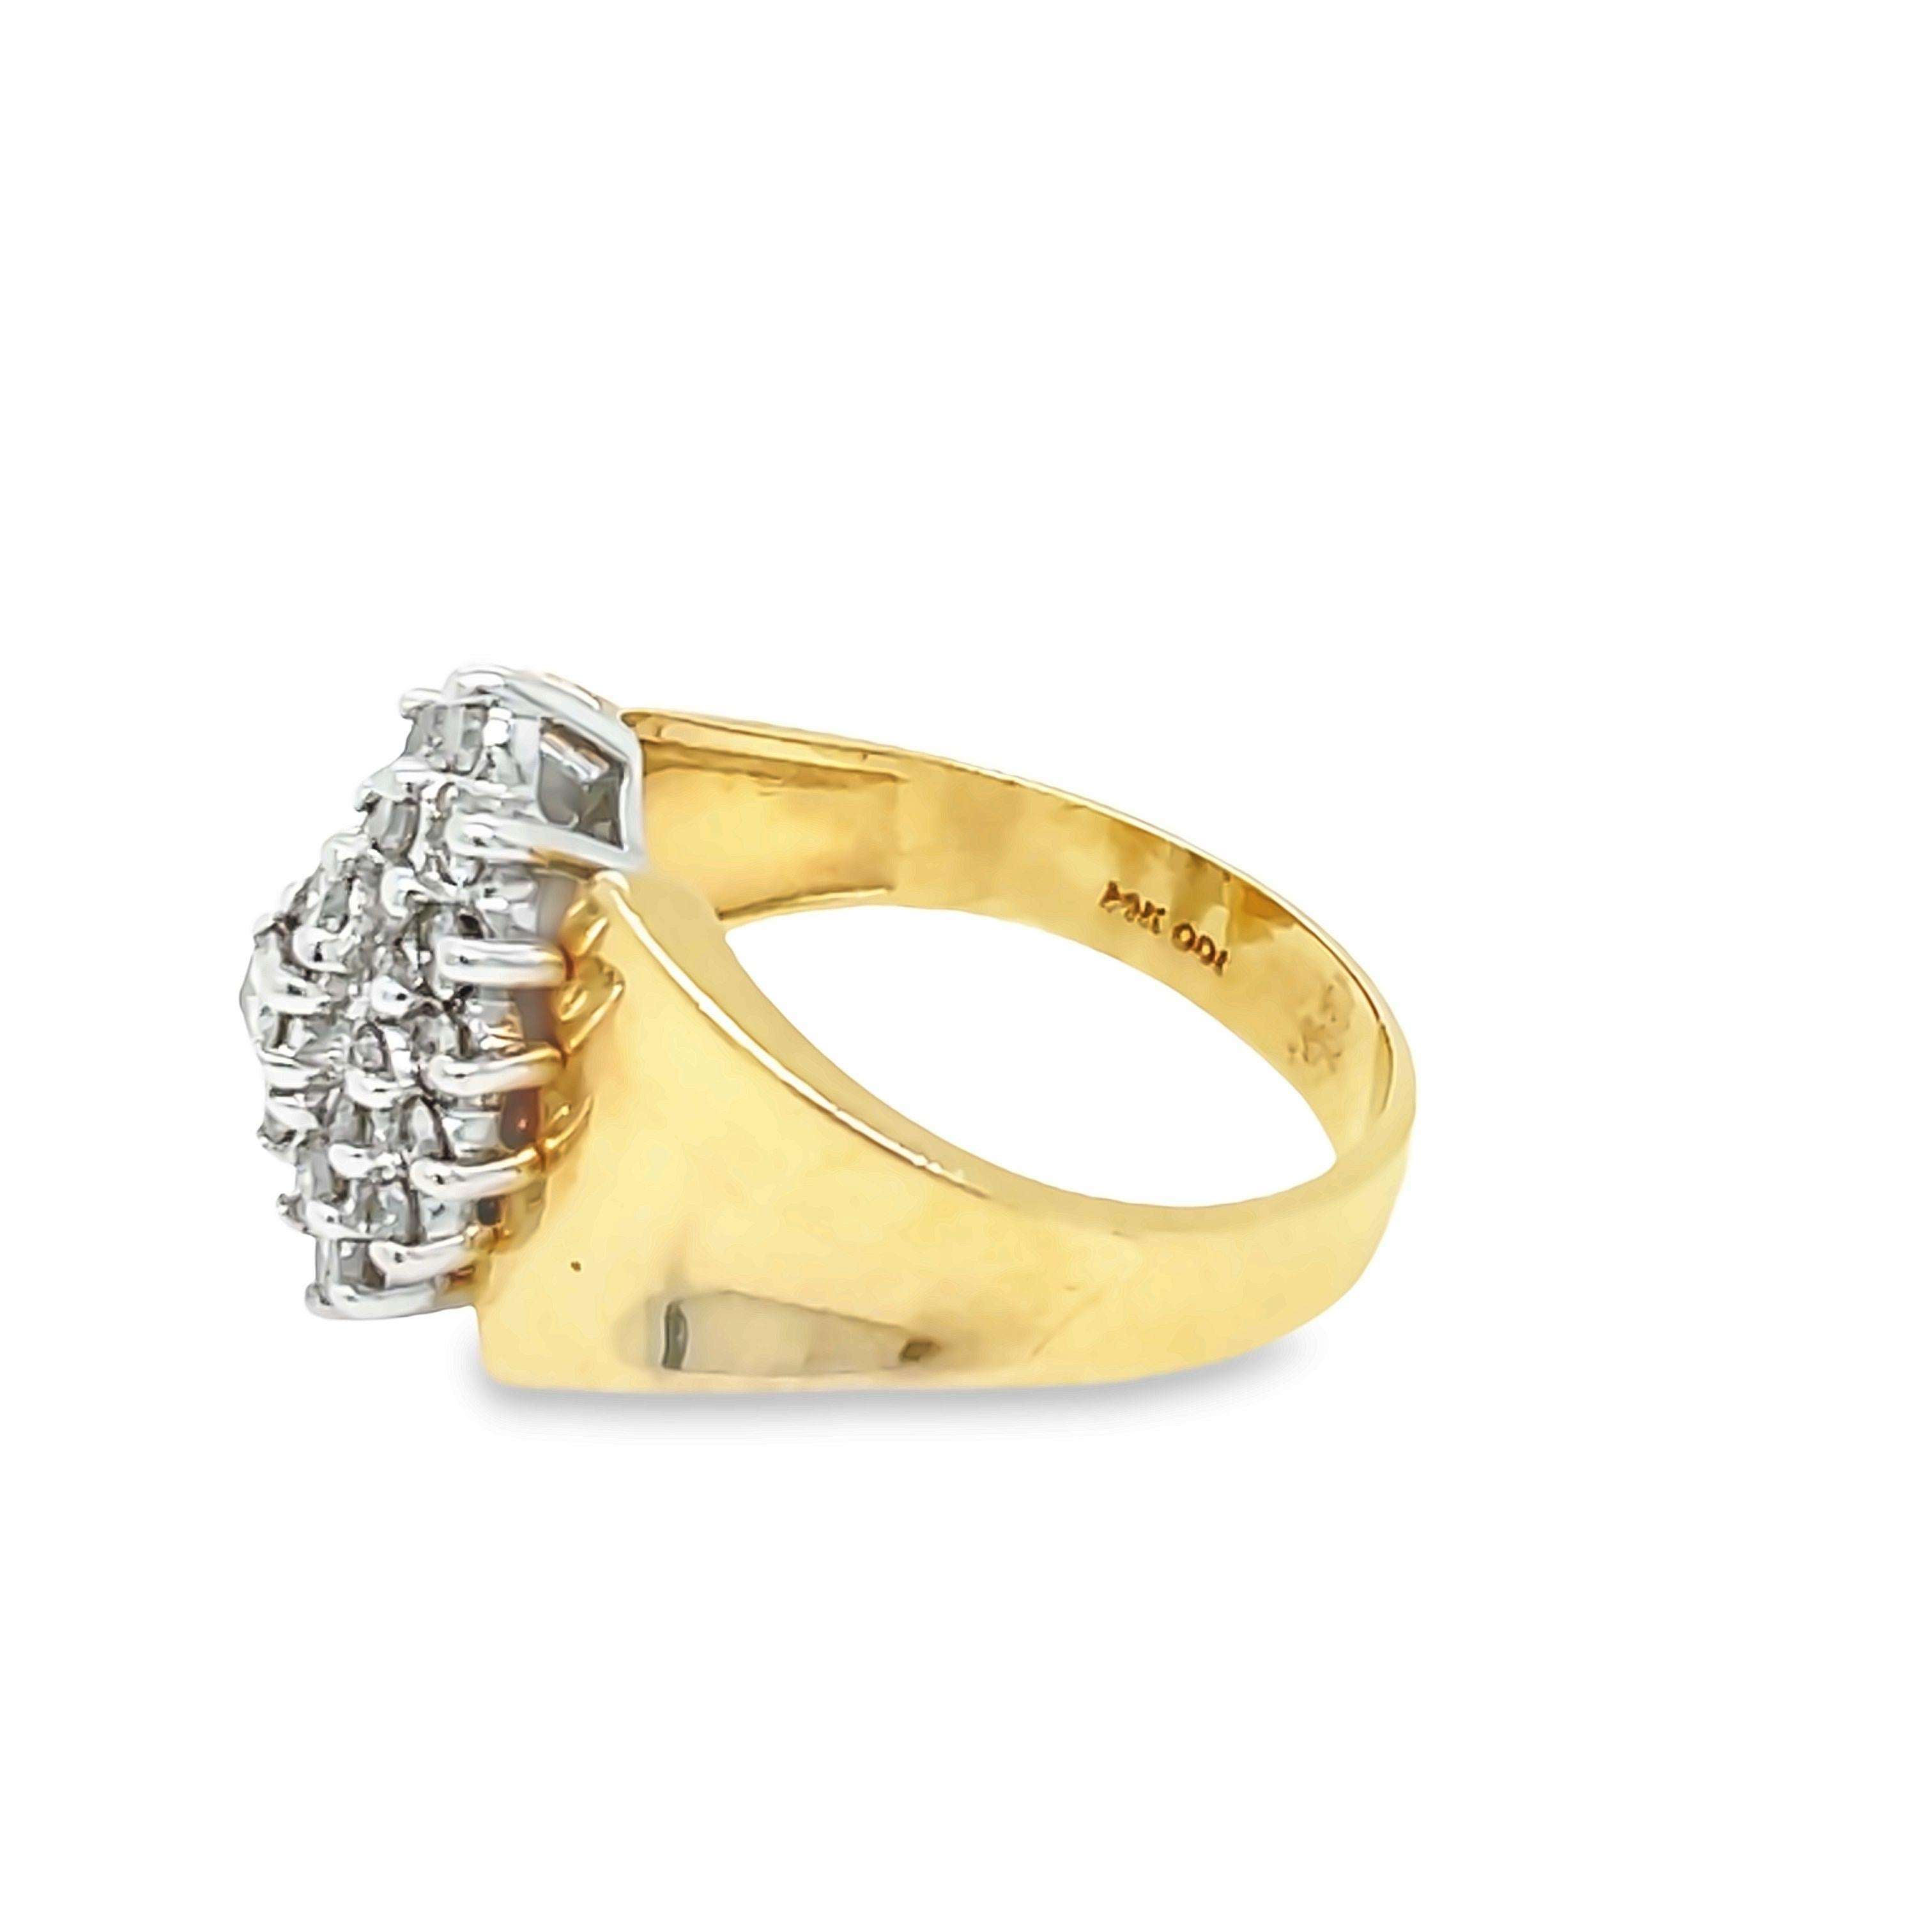 Vintage Diamond Navette Ring in 14k White / Yellow Gold In Good Condition For Sale In beverly hills, CA